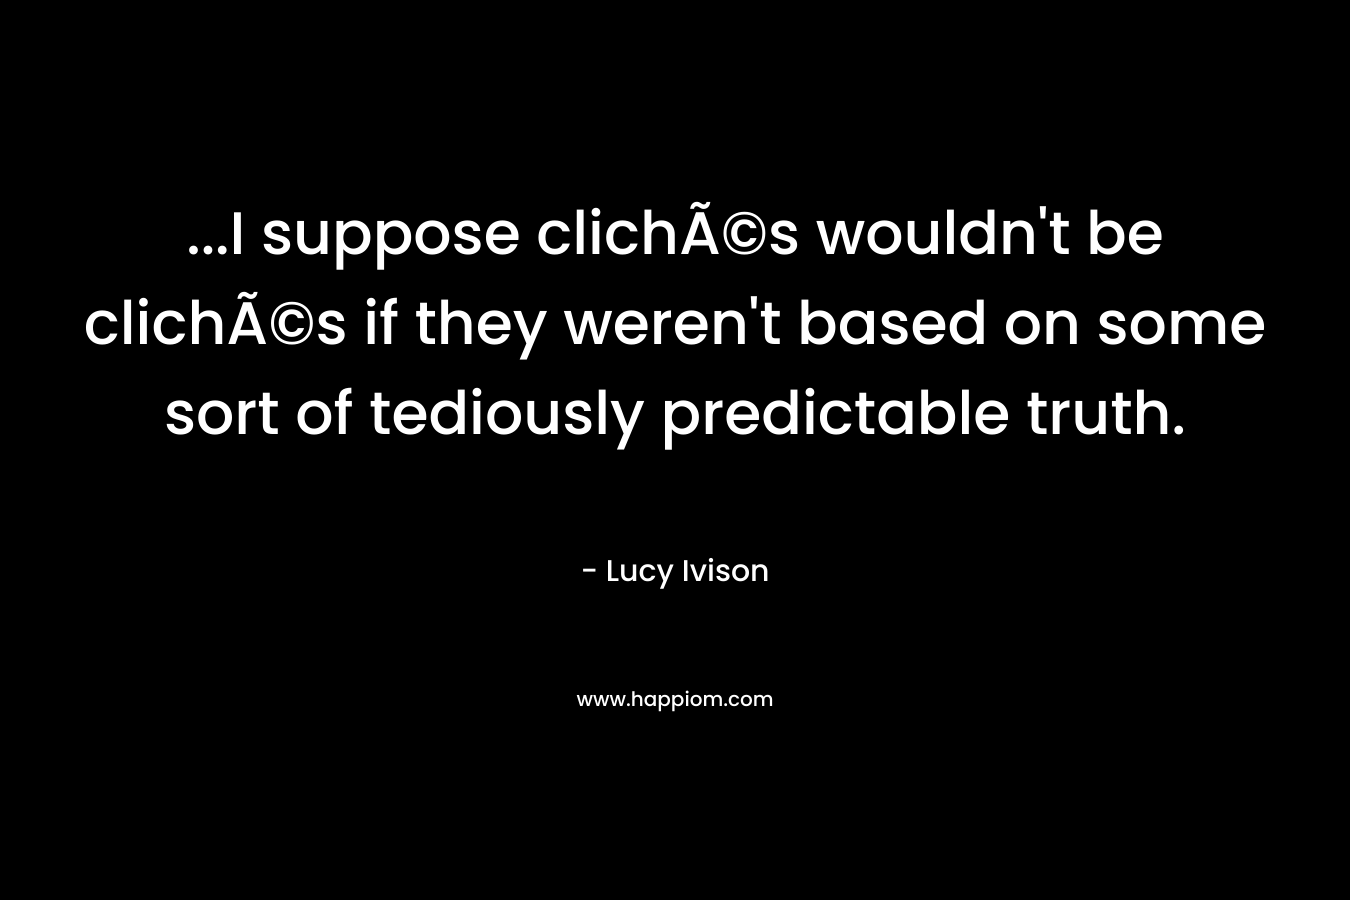 ...I suppose clichÃ©s wouldn't be clichÃ©s if they weren't based on some sort of tediously predictable truth.